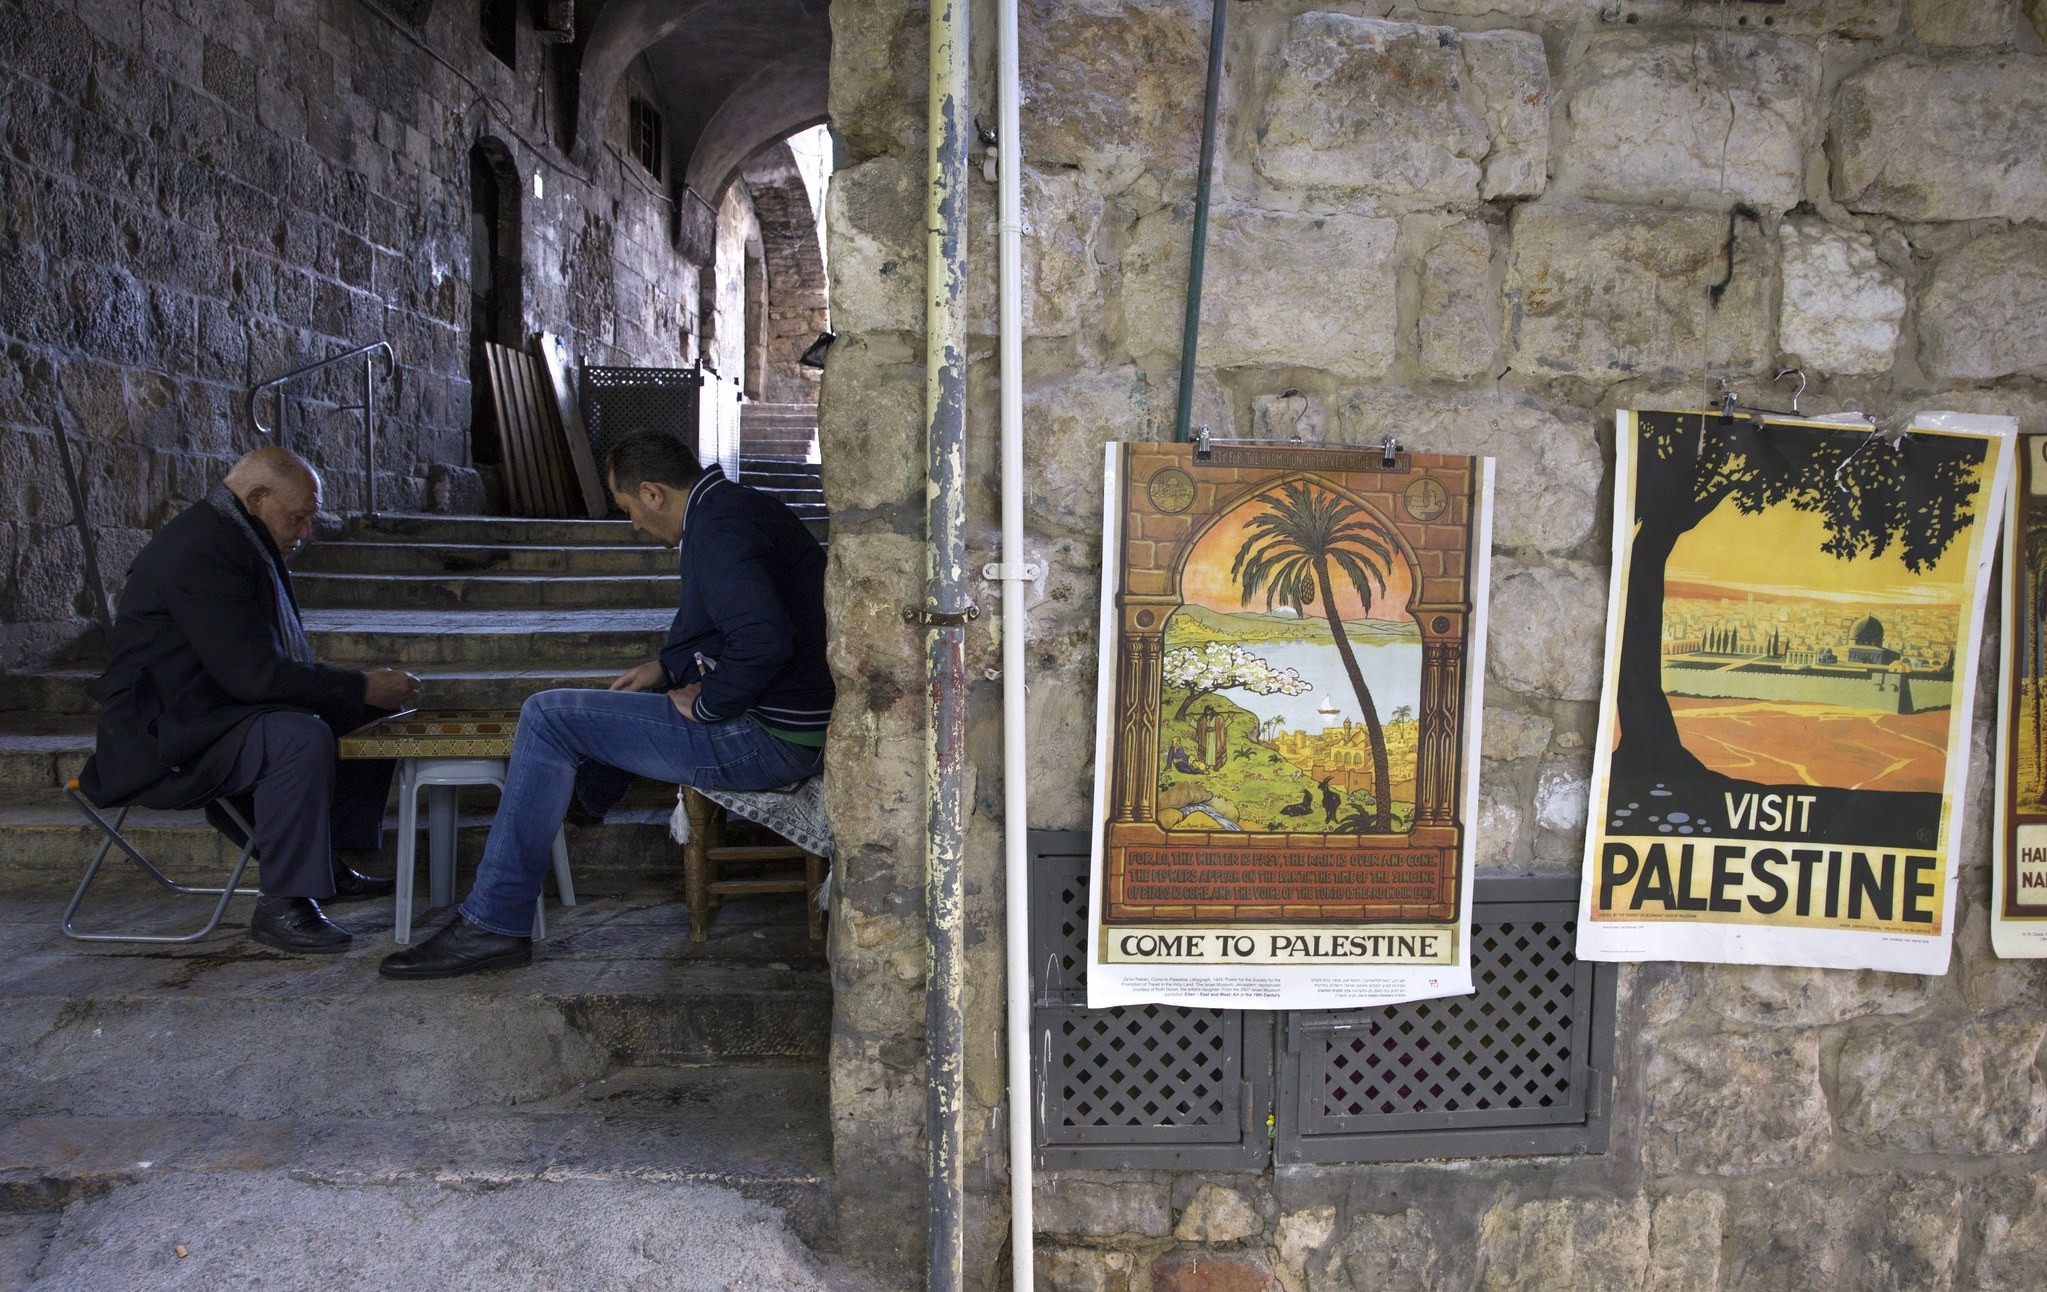 Palestinians in the Moslem Quarter of Jerusalem's Old City pass the time playing dominoes nearby some reproductions of old tourism posters enticing visitors to 'Palestine', on 14 February 2018.  (EPA Photo)